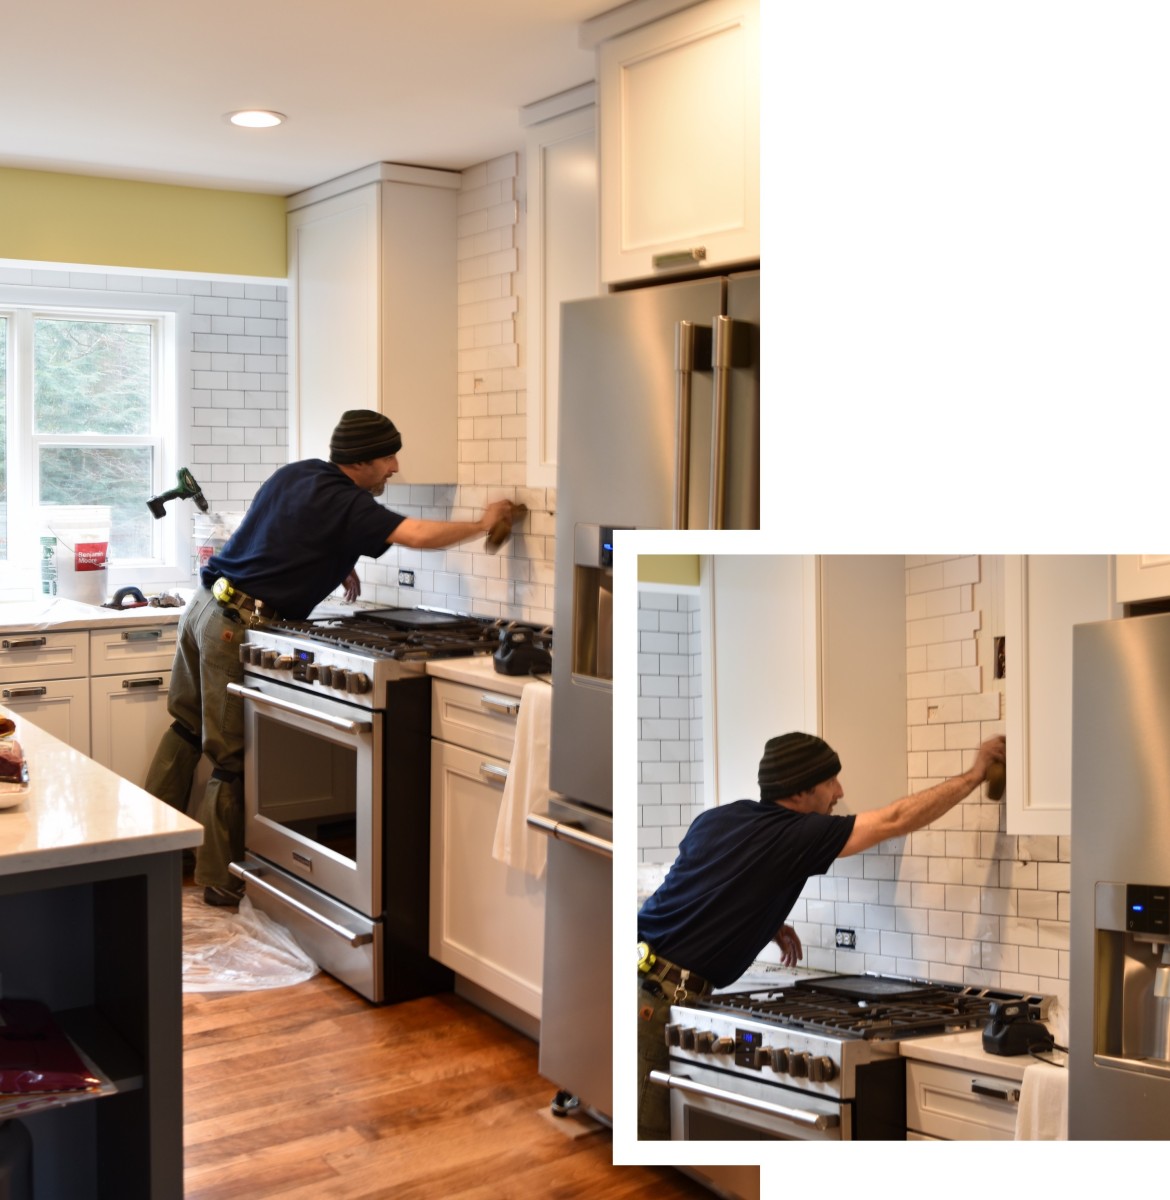 How do you choose the perfect kitchen tile backsplash? There are so many decisions. These are 12 ideal options for the kitchen backsplash and ONE is what I chose for my kitchen renovation. Click over to check them out + follow along on how I installed the tile > www.JennaBurger.com